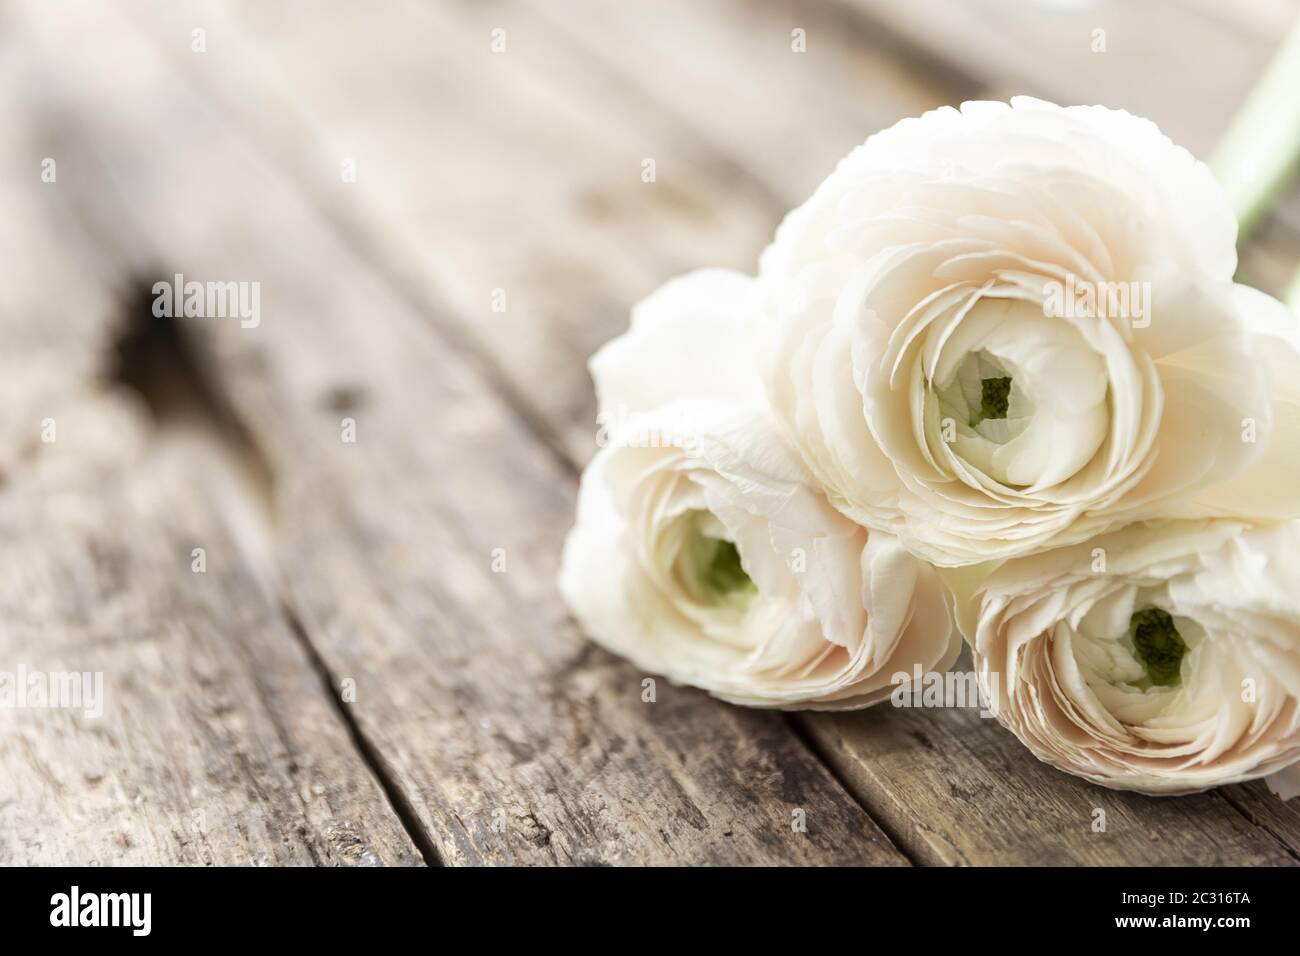 persian buttercup flower on a wooden grungy background Stock Photo